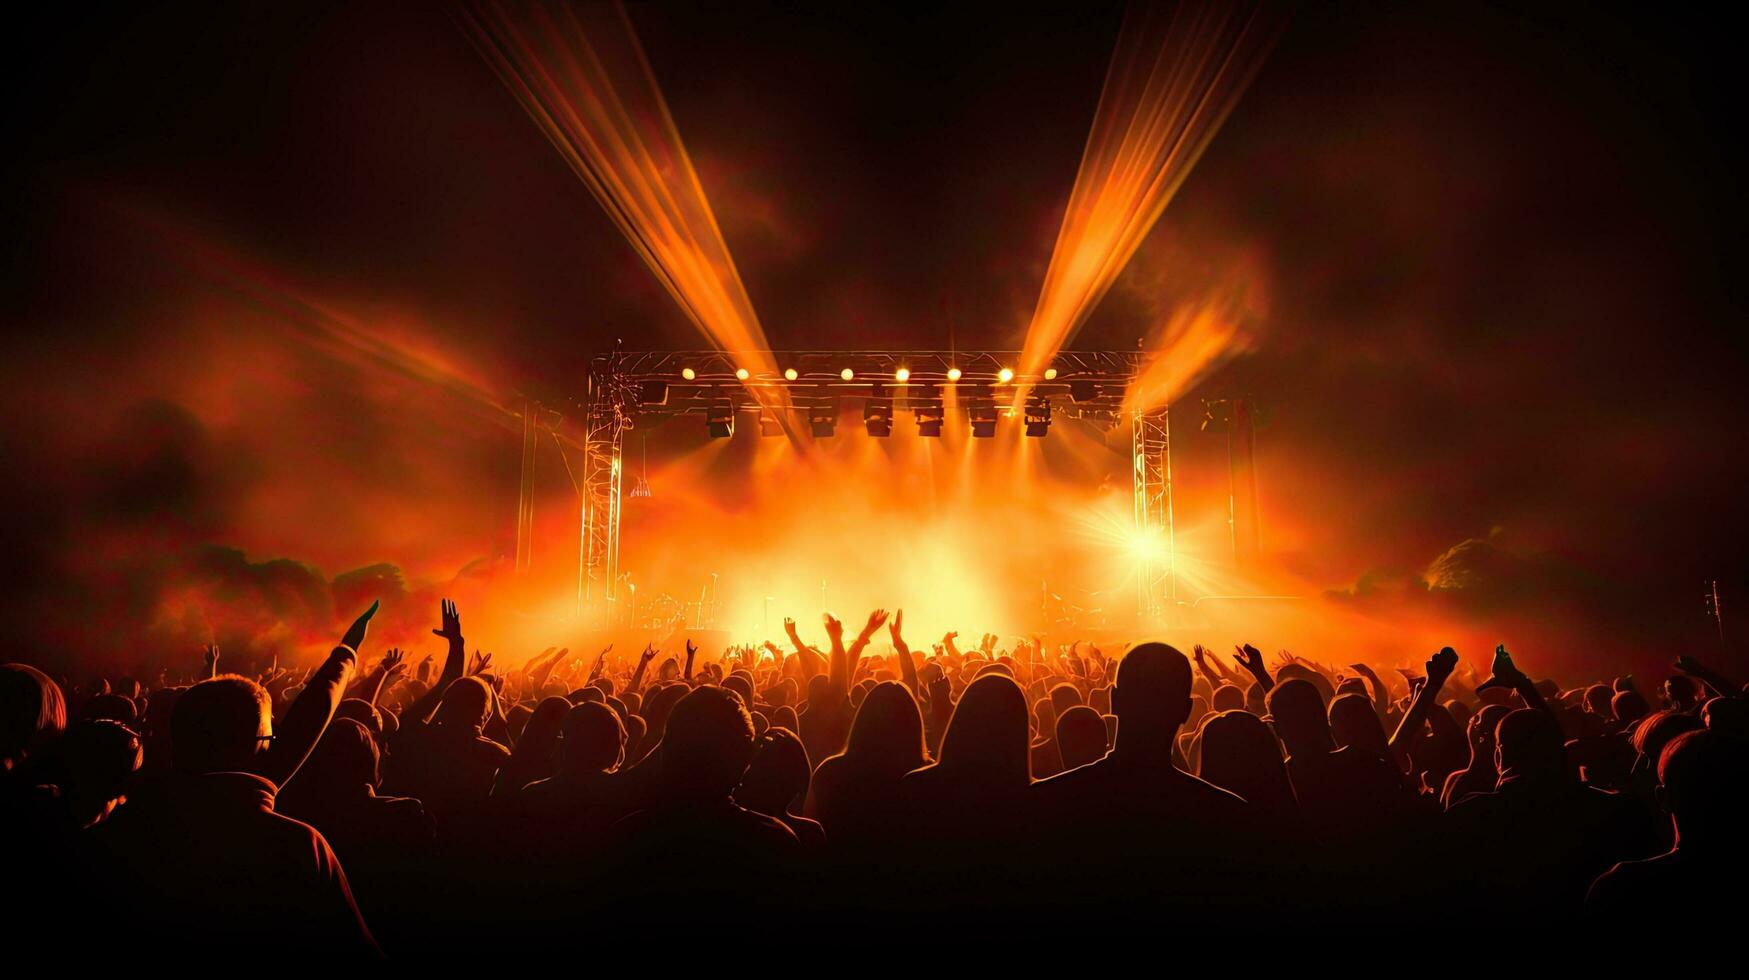 Crowd silhouettes against stage lights photo